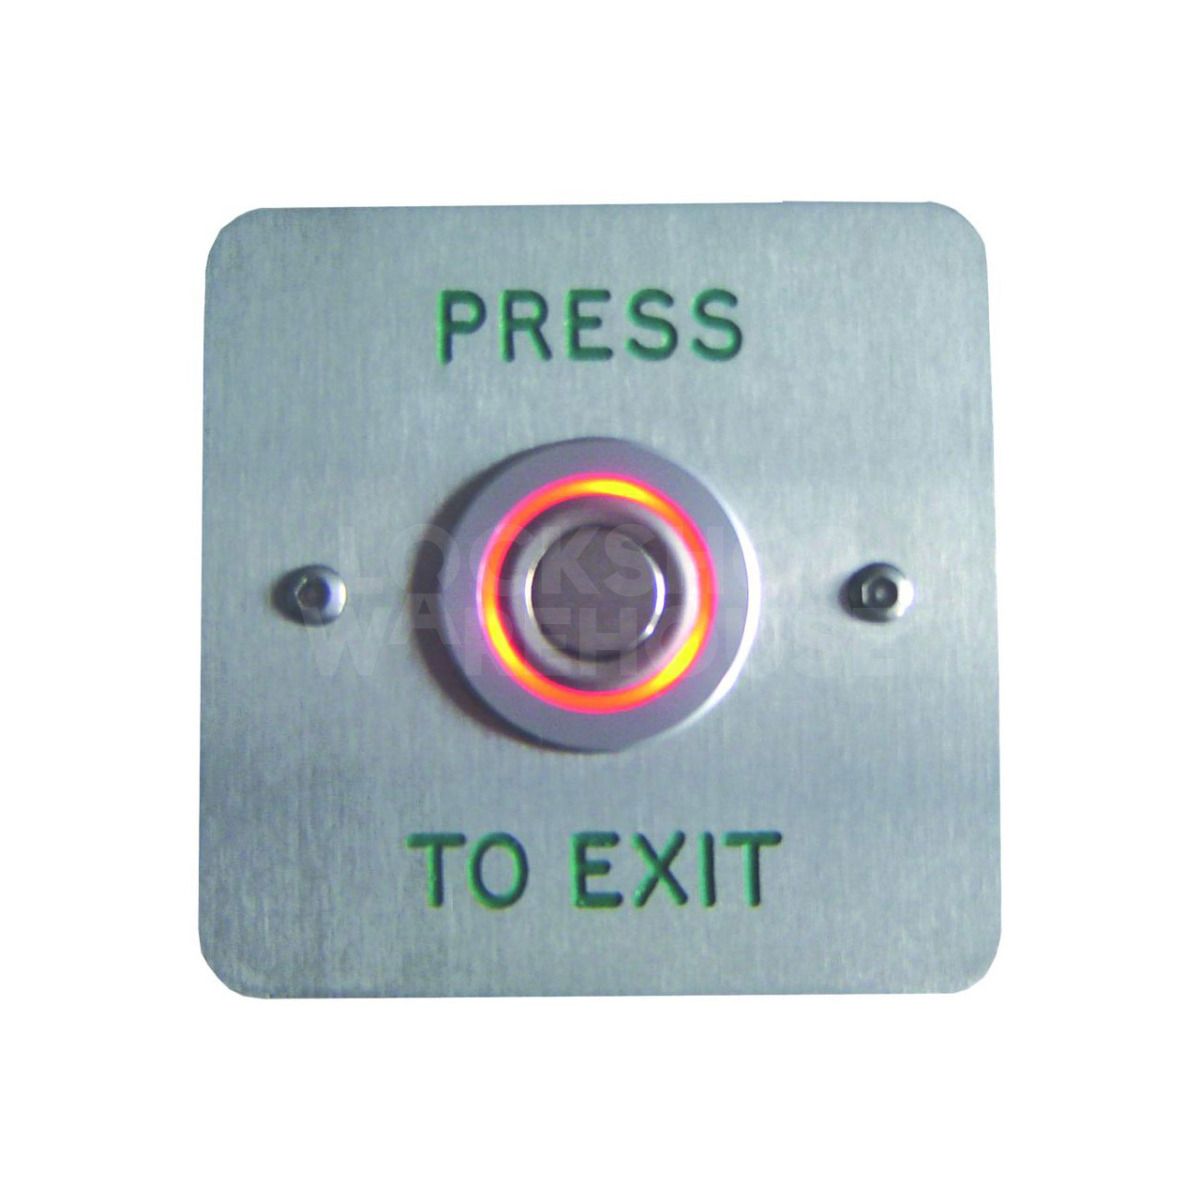 ASEC Halo Effect Press to exit button - Red/Green